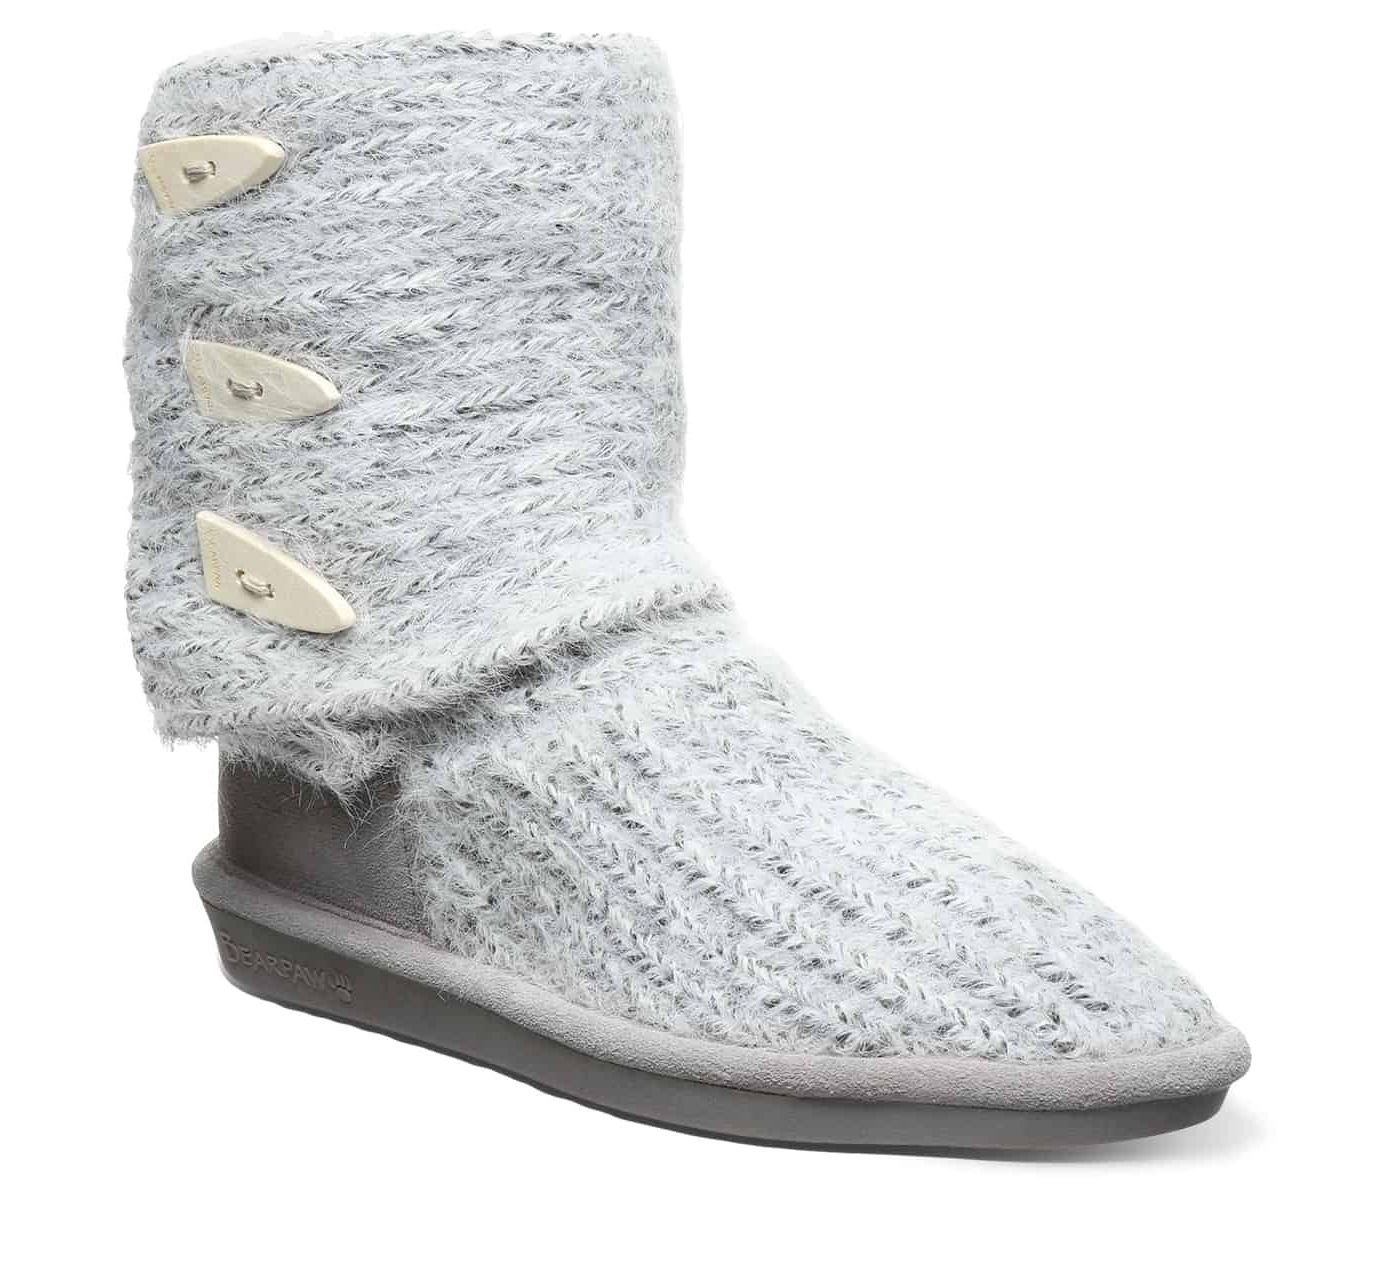 light gray knit boots folded over with toggle